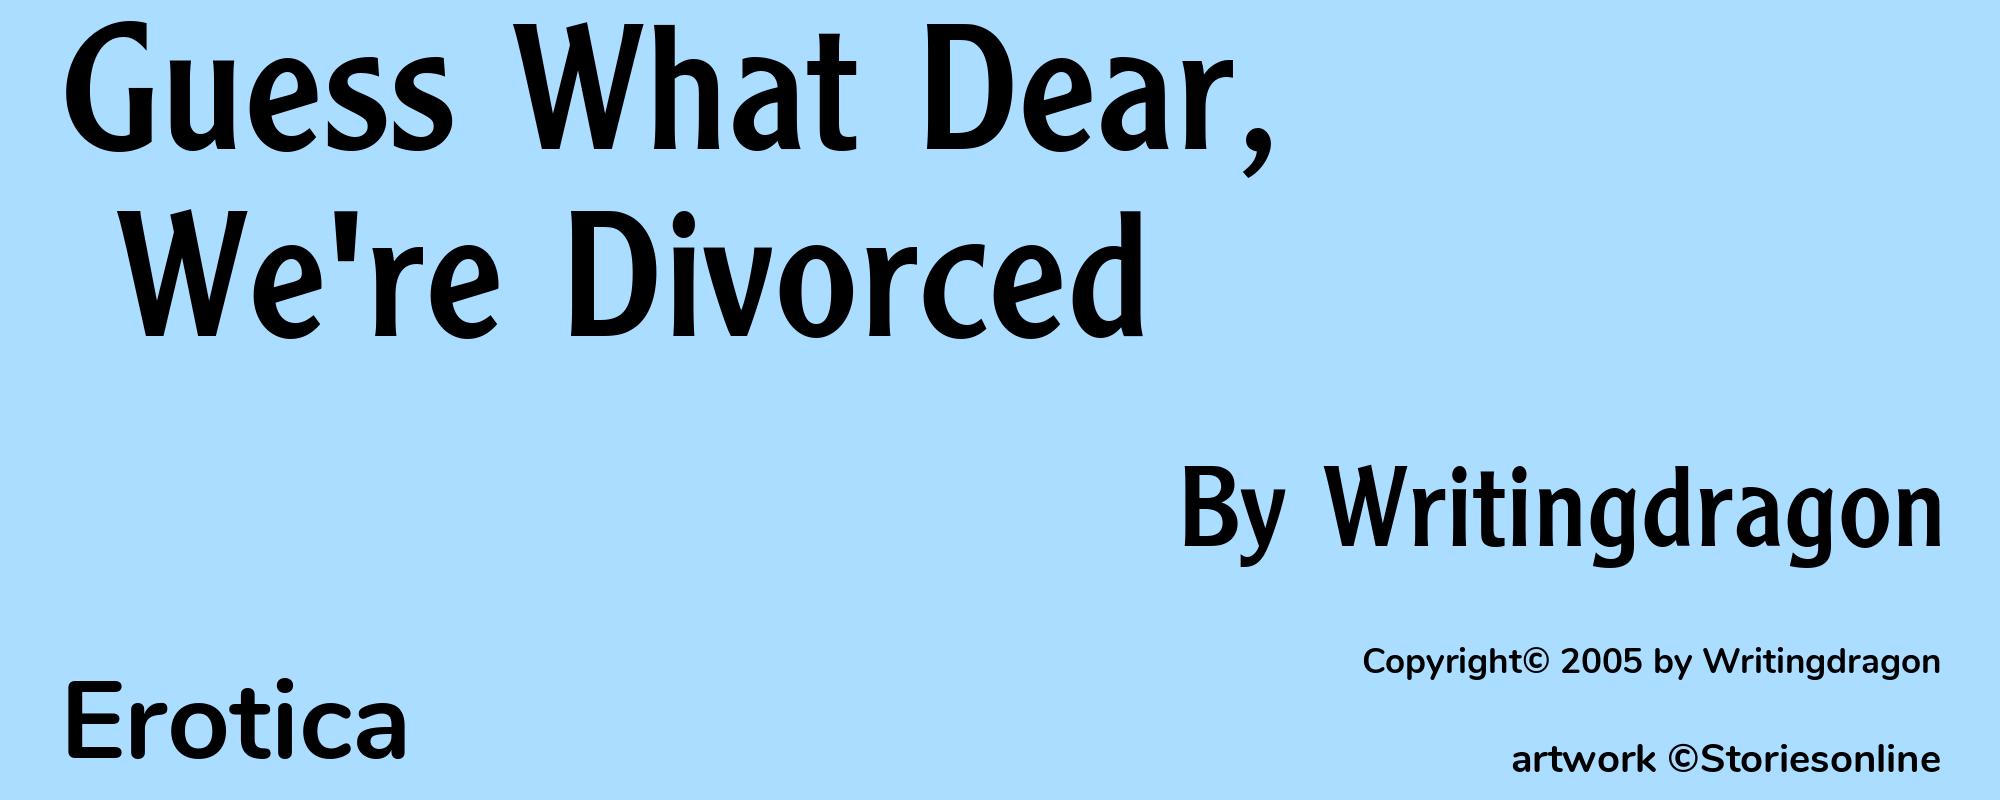 Guess What Dear, We're Divorced - Cover